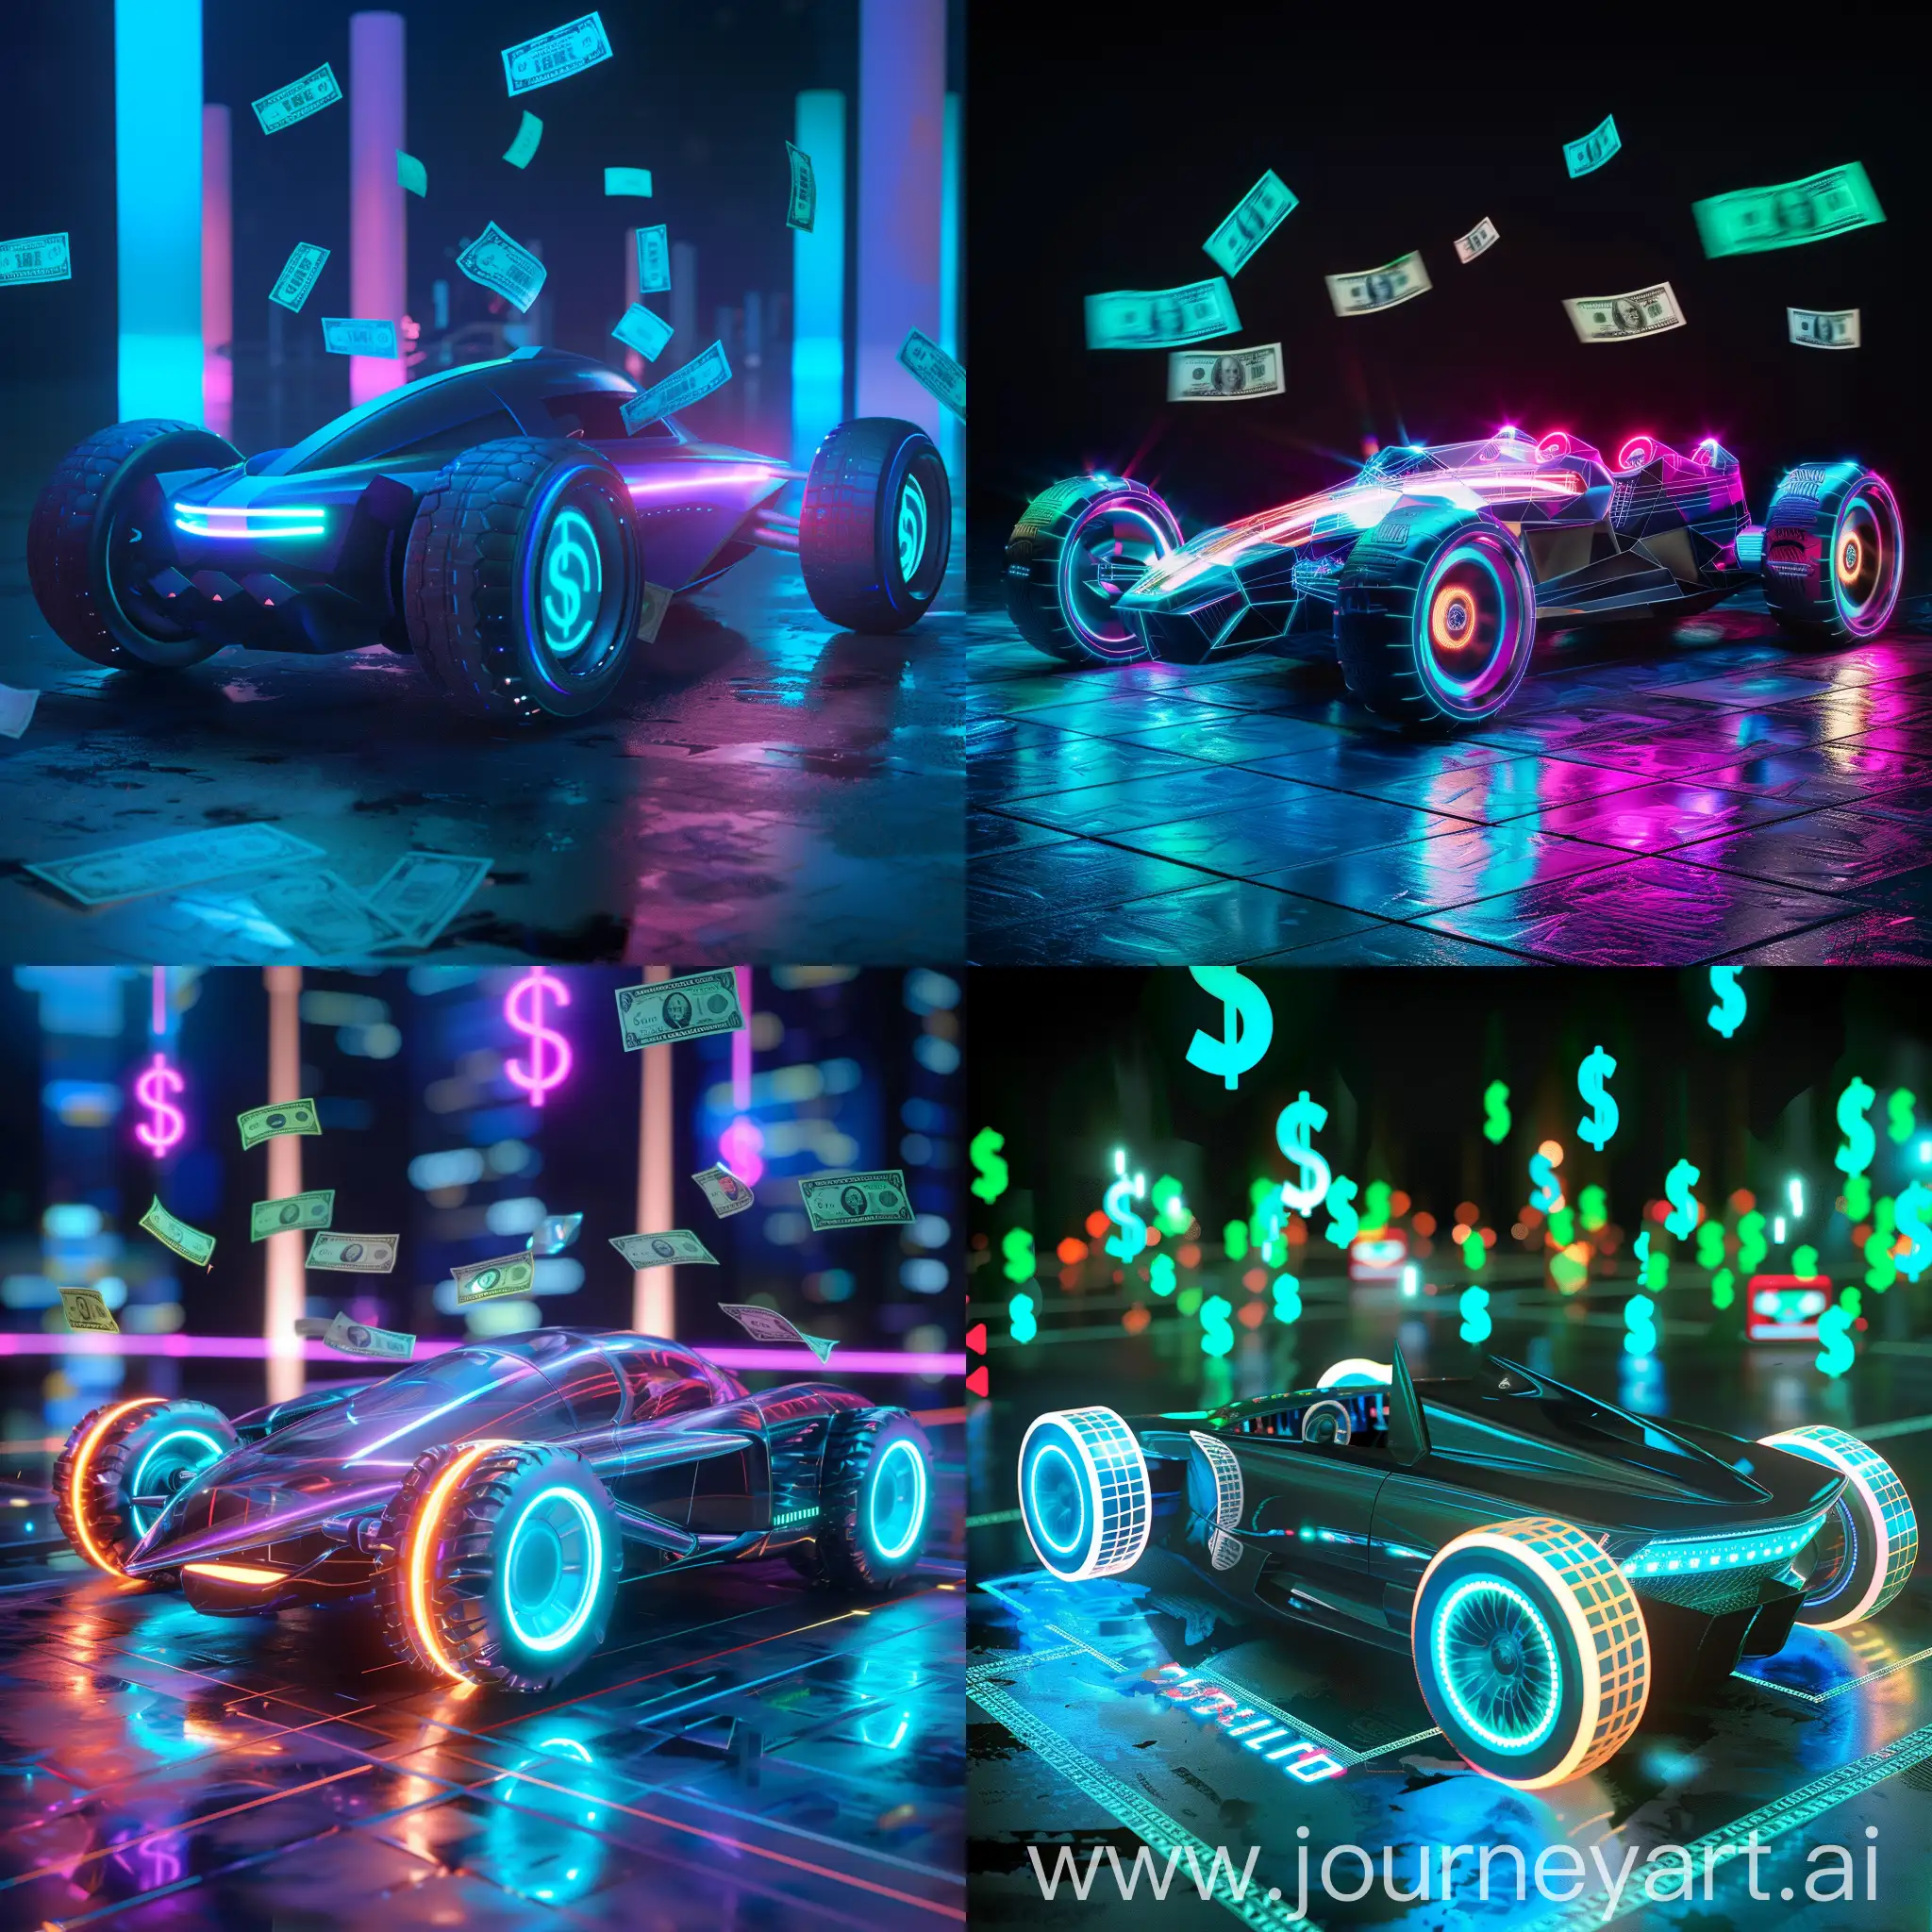 Create a futuristic car with 4 wheels, rgb, and floating dollar signs all around it.